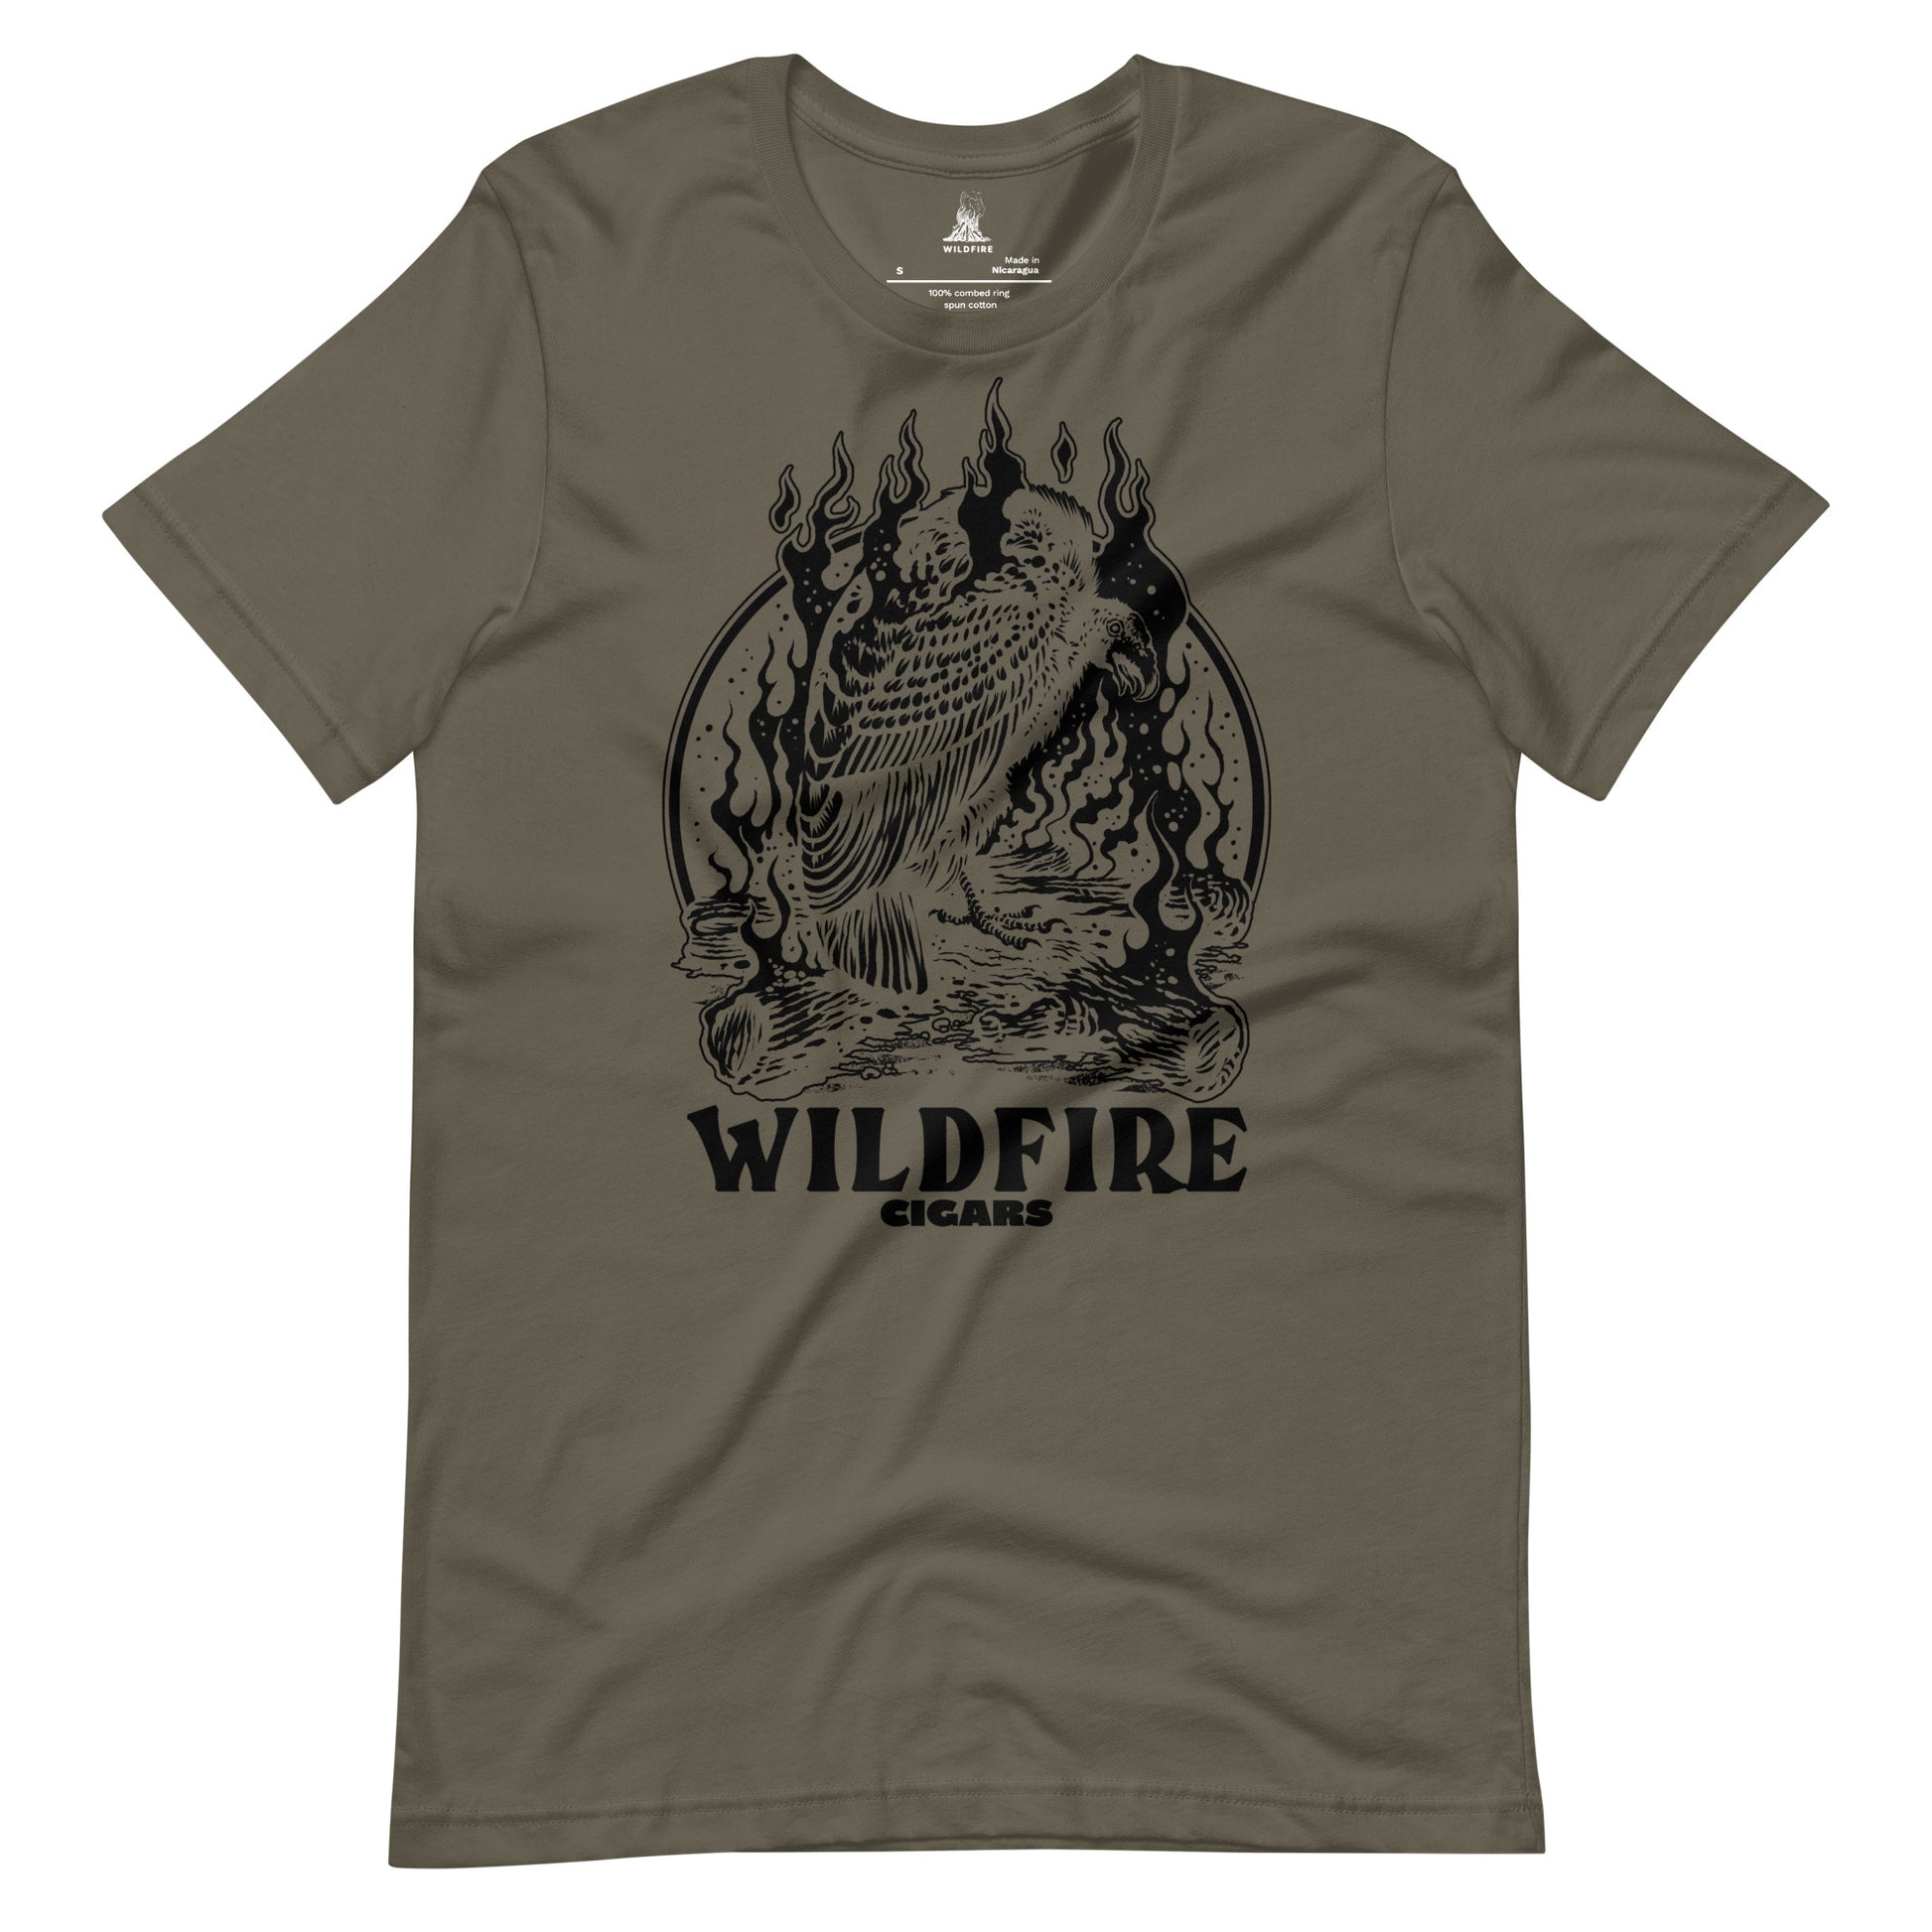 Wildfire Cigars black Vulture on military green cigar tshirt front view